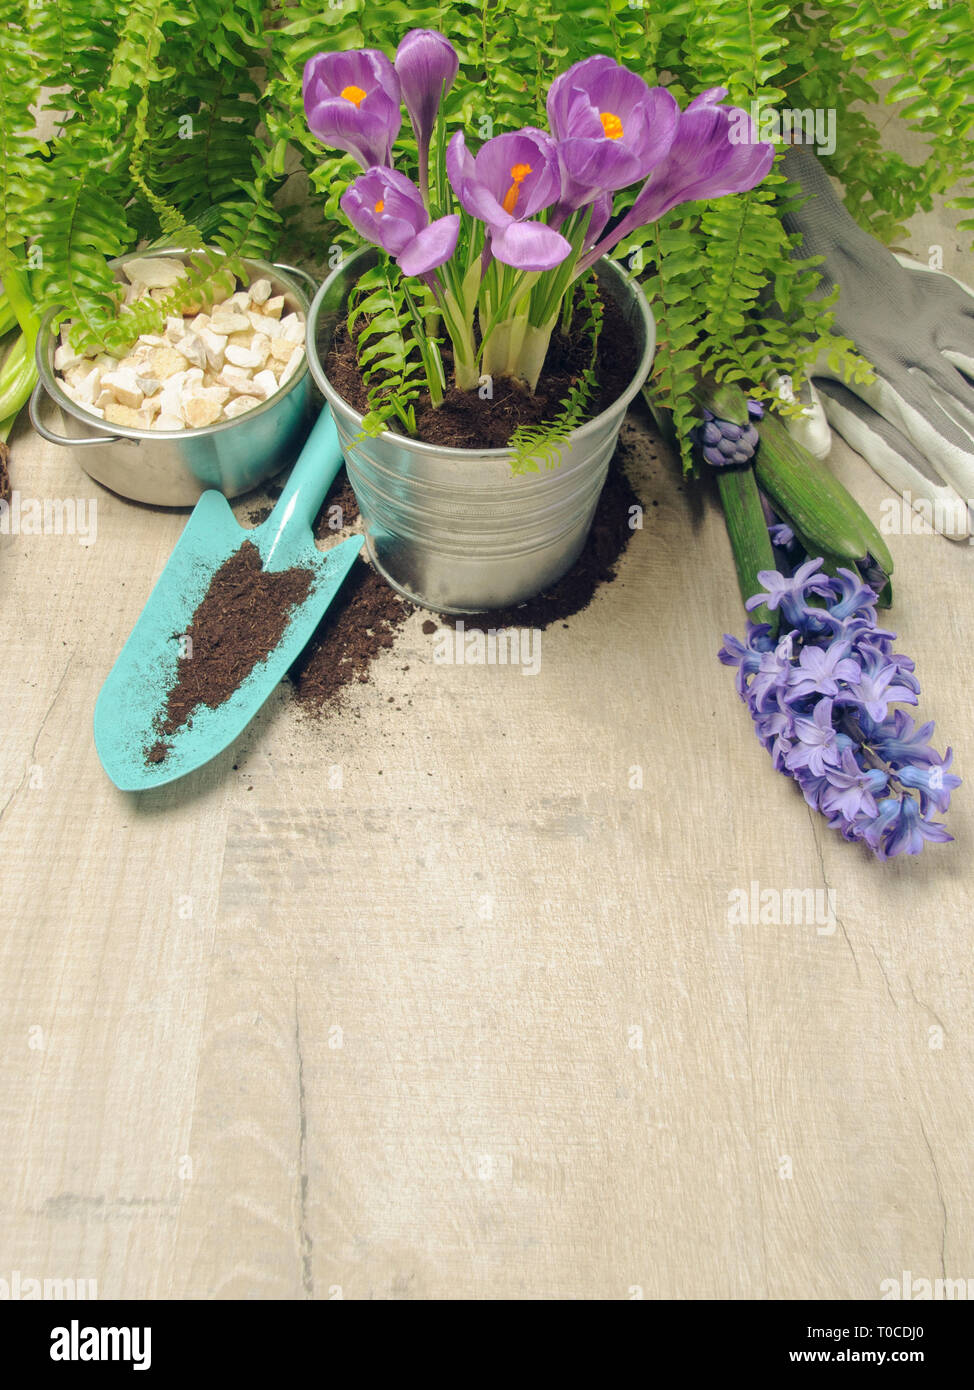 Potted flower, ground, spade and gloves on a wooden table. Spring gardening background. Stock Photo